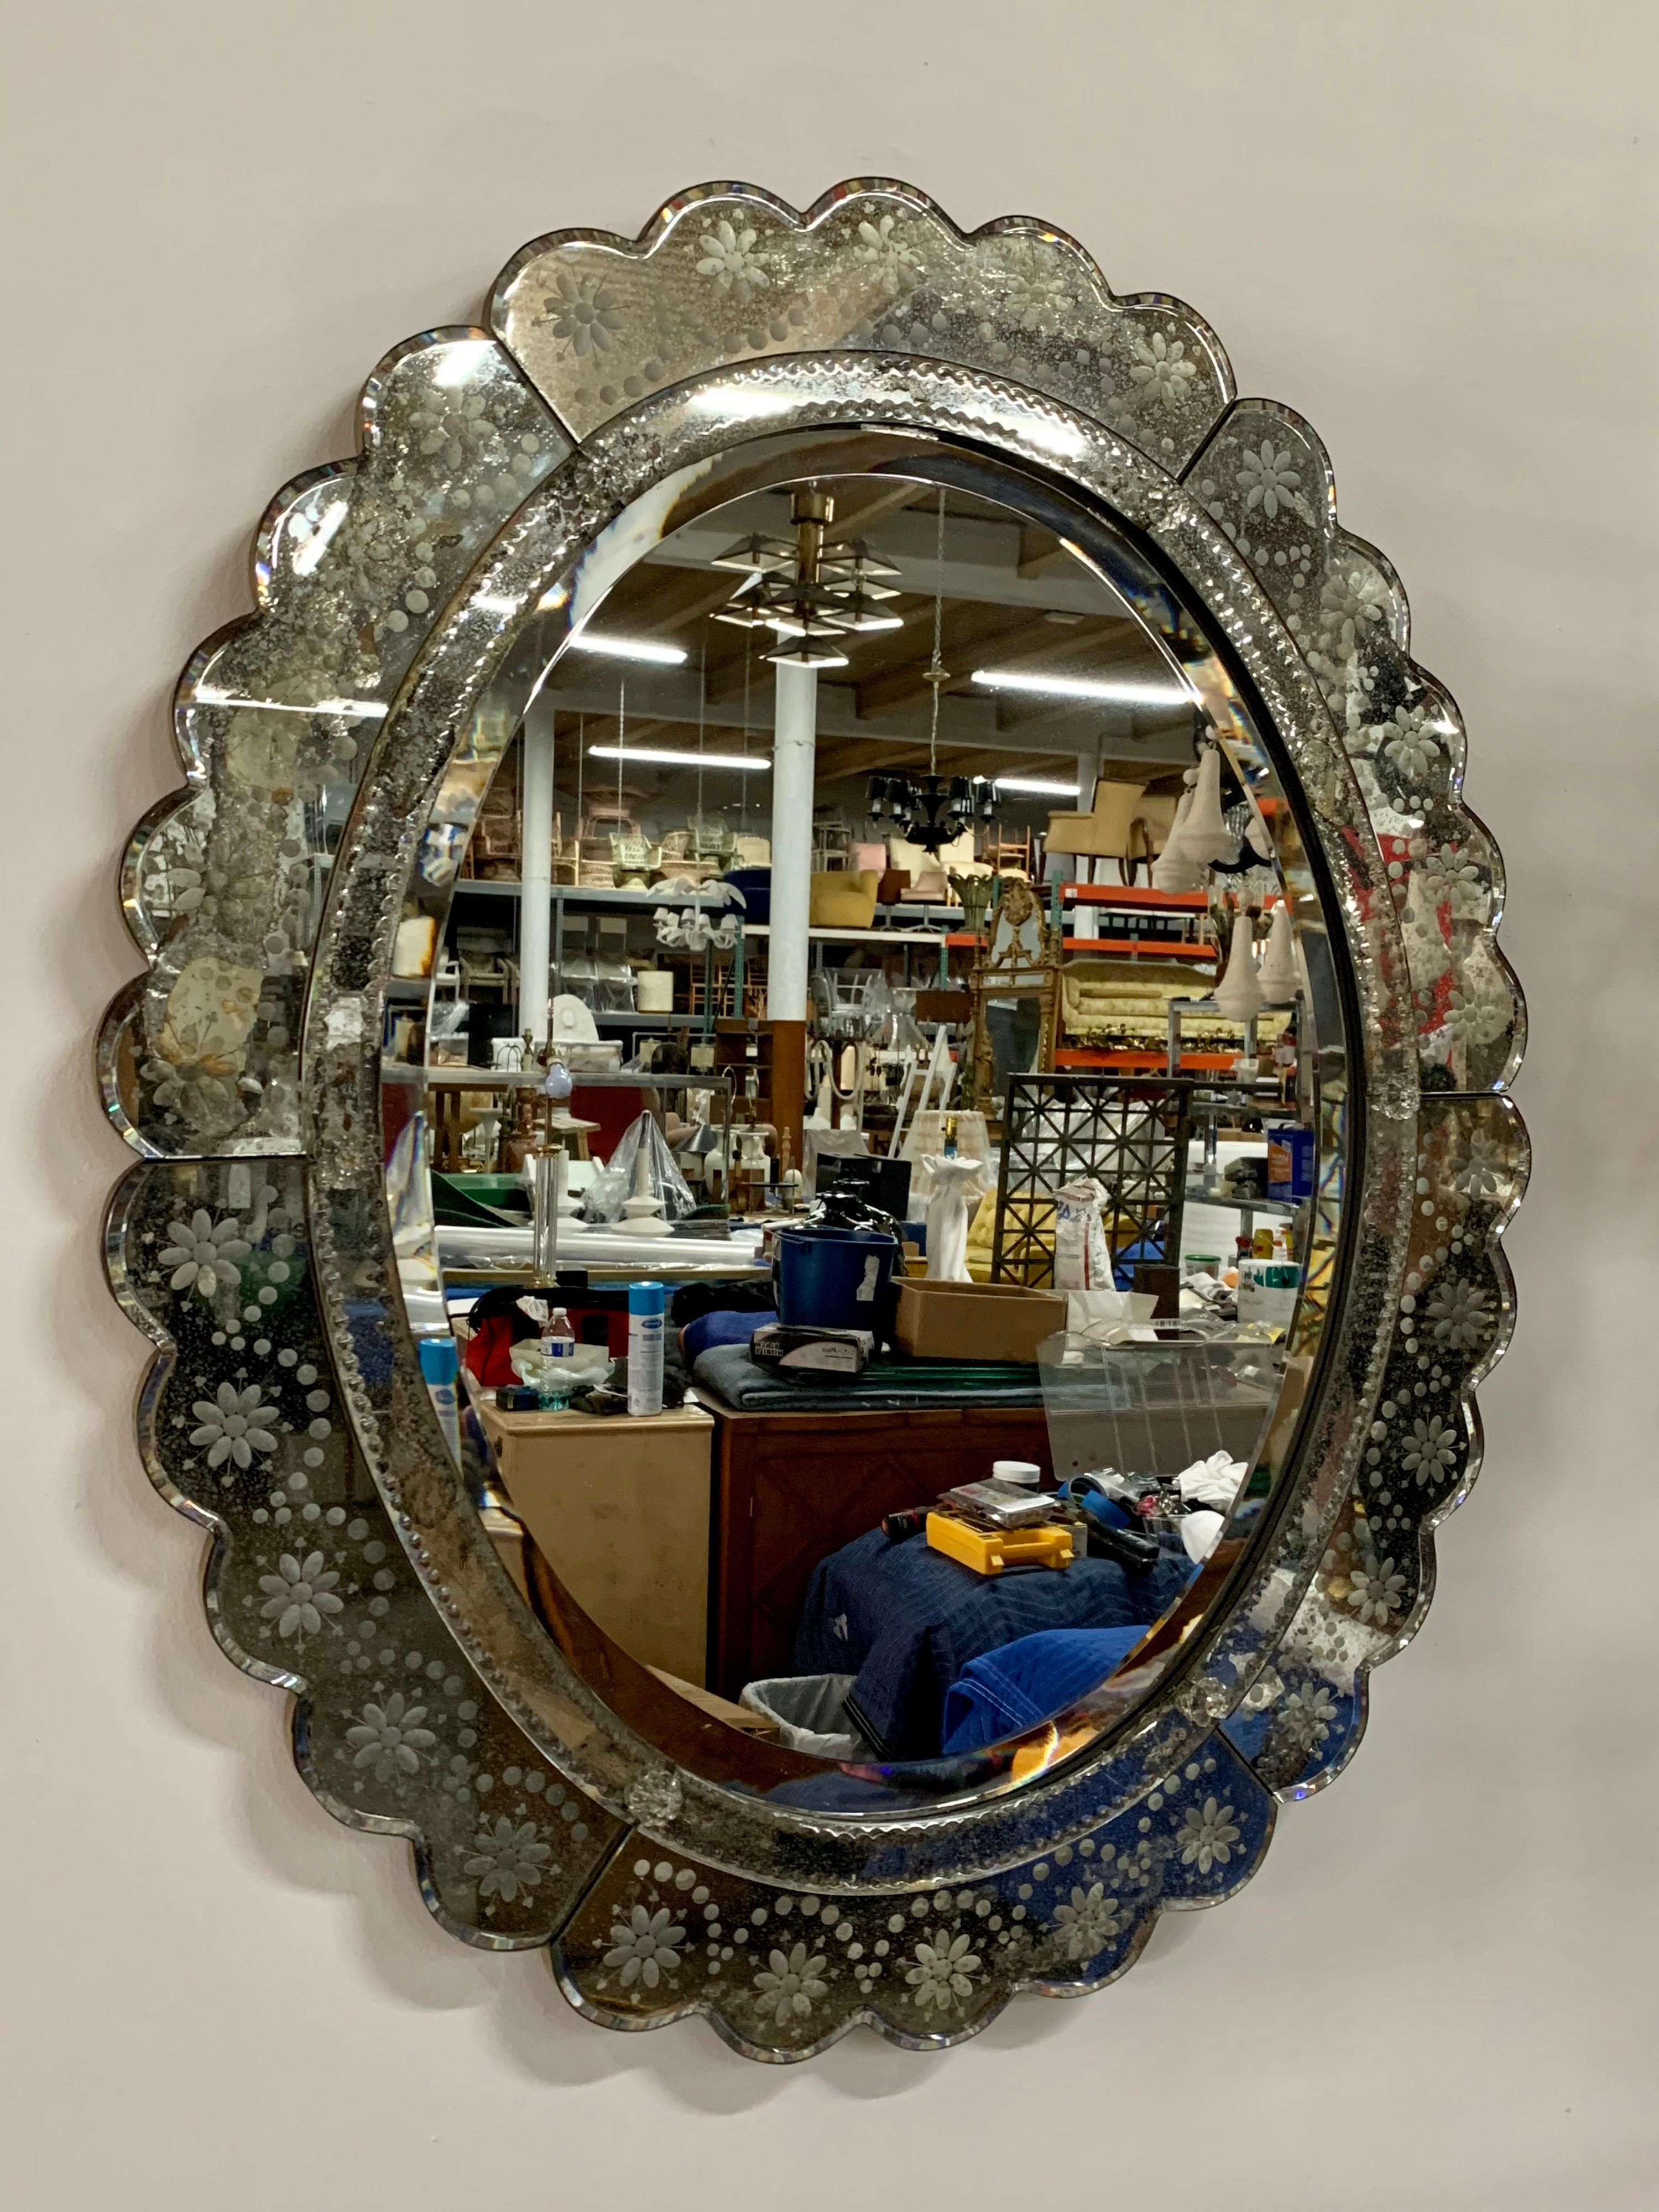 This antiqued venetian wall mirror has so much character and design elements. Scalloped framed and layers of mirrored accents with glass fleurettes. Despite its aged and distressed mirror finish, it is still beautiful and ready to hang!